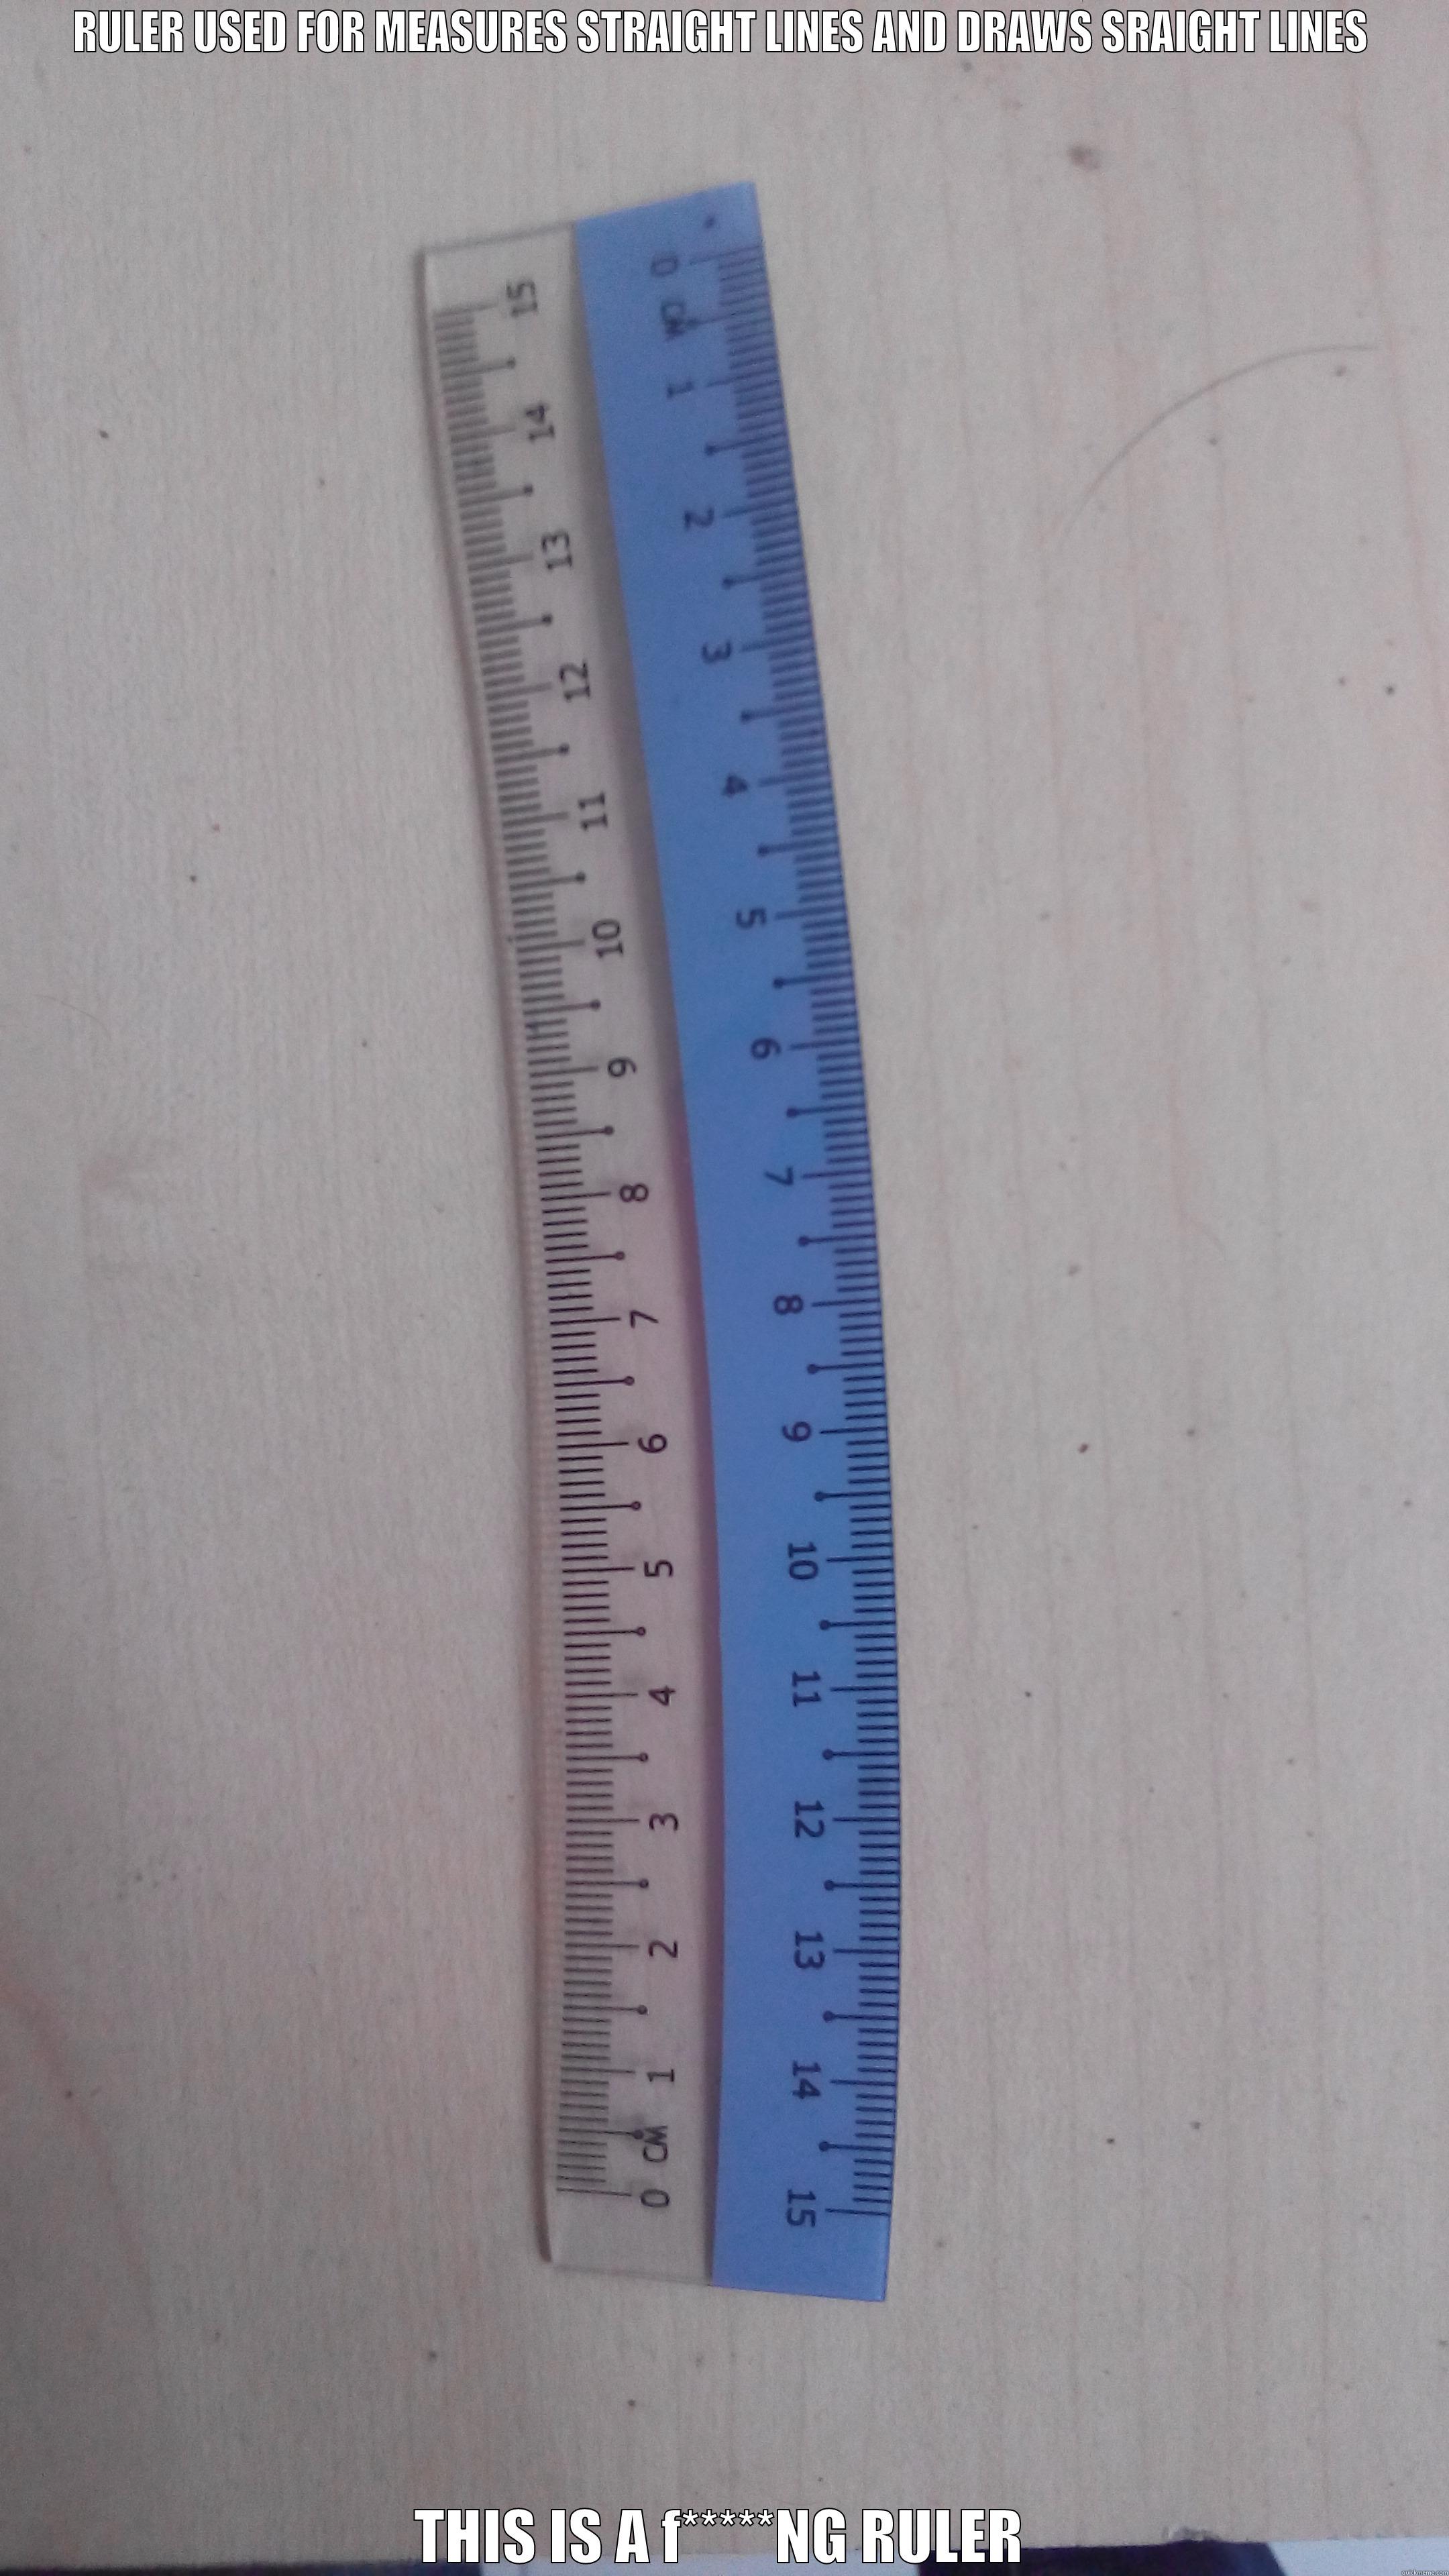 Mighty Ruler. No Rules Ruler - RULER USED FOR MEASURES STRAIGHT LINES AND DRAWS SRAIGHT LINES THIS IS A F*****NG RULER Misc